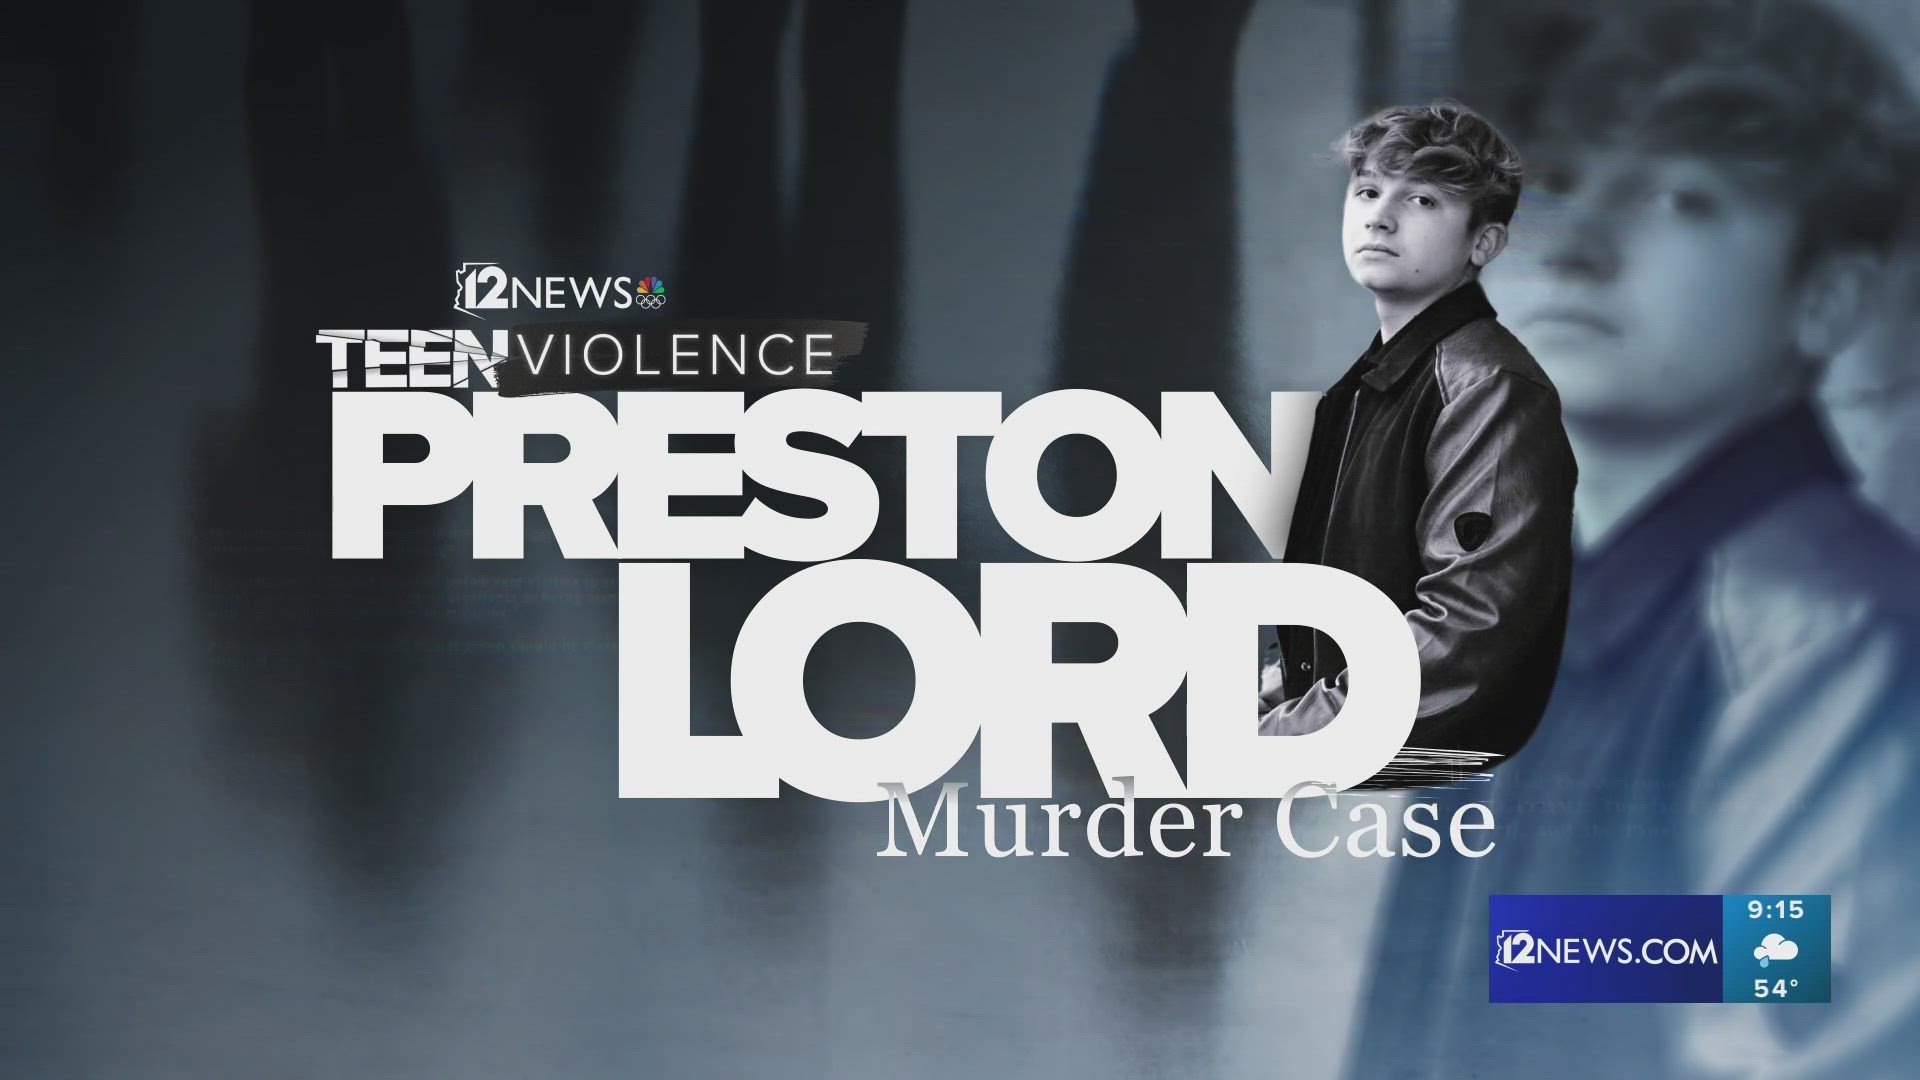 Just 24 hours after the first suspects were arrested in connection with the murder of Preston Lord, more suspects are now facing the same charges.